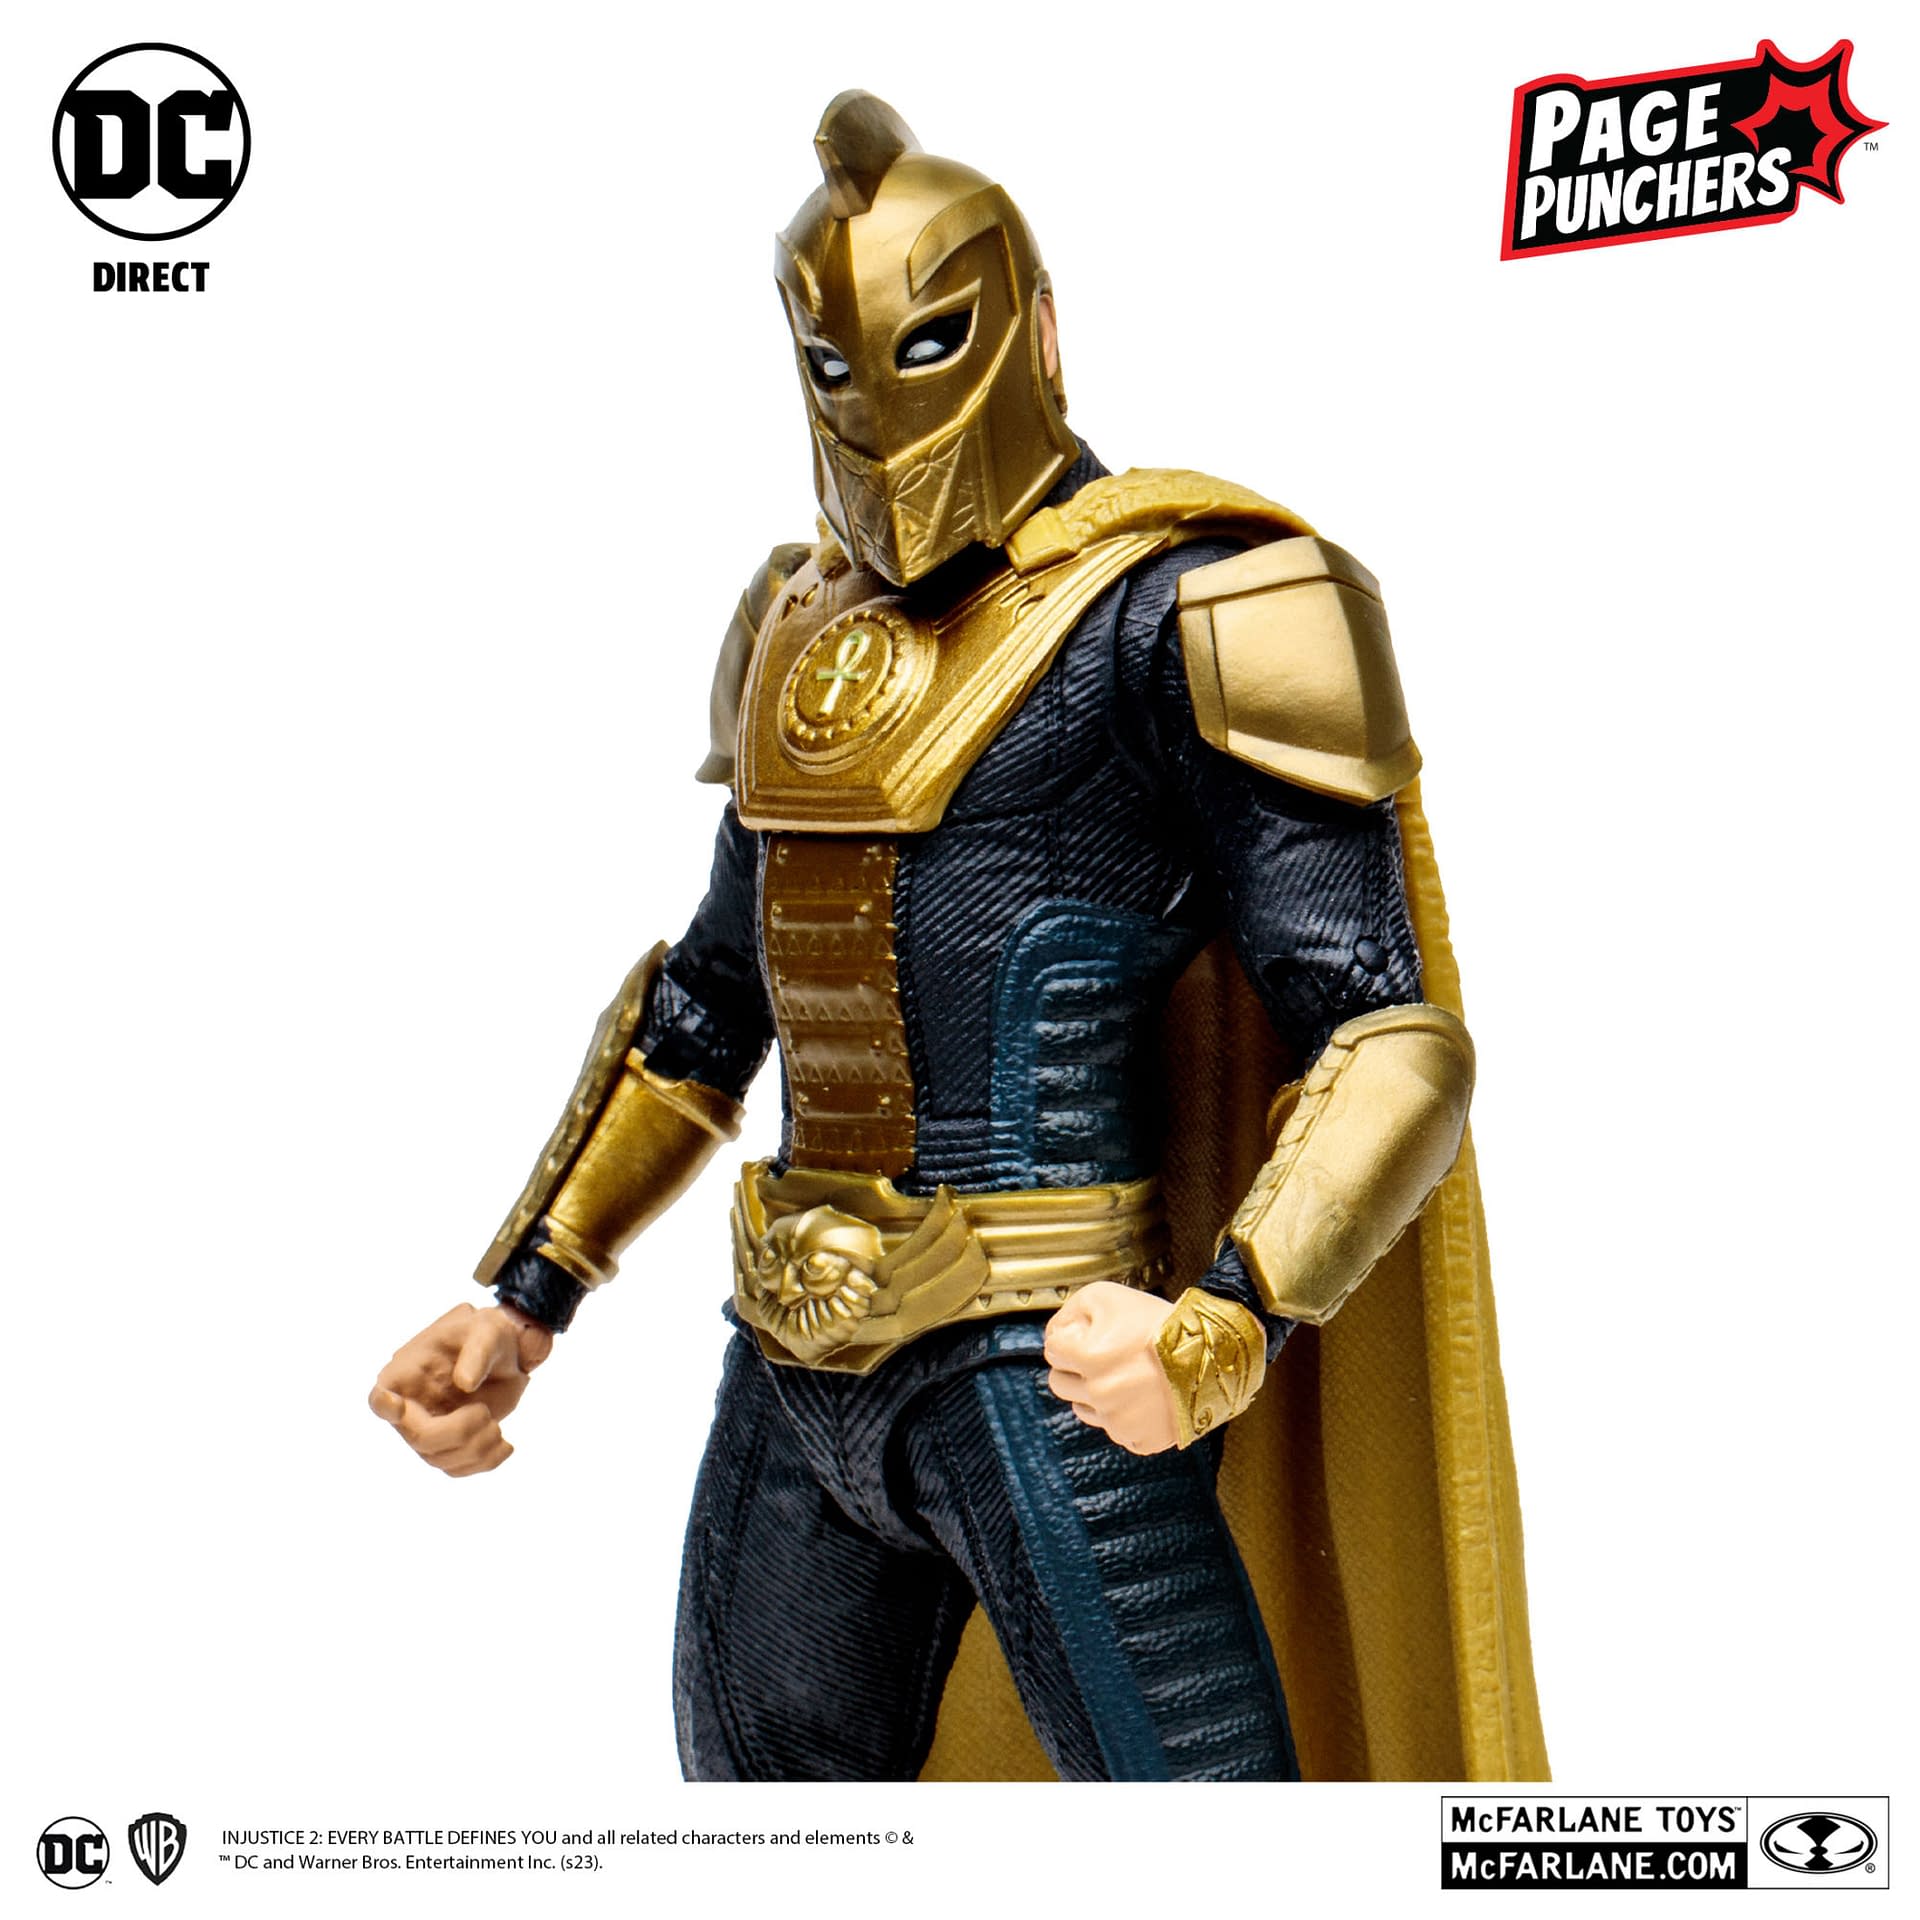 DC Comics Dr. Fate Returns to McFarlane Toys for Injustice 2 Wave 